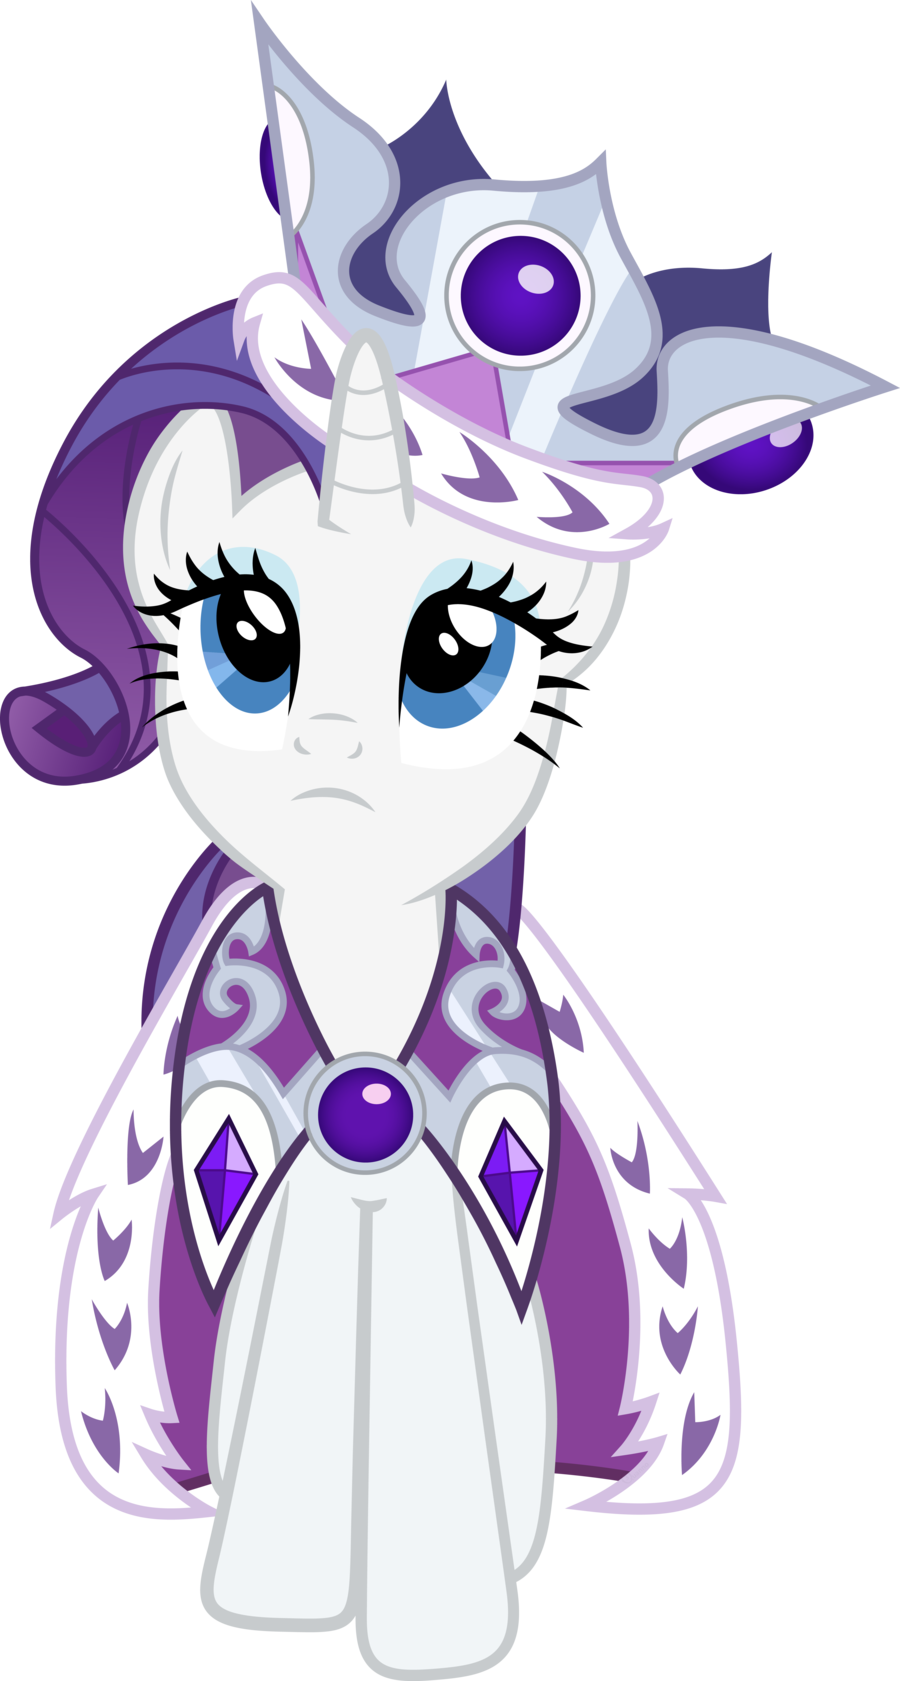 queen_rarity_by_quanno3-d4jlc06.png